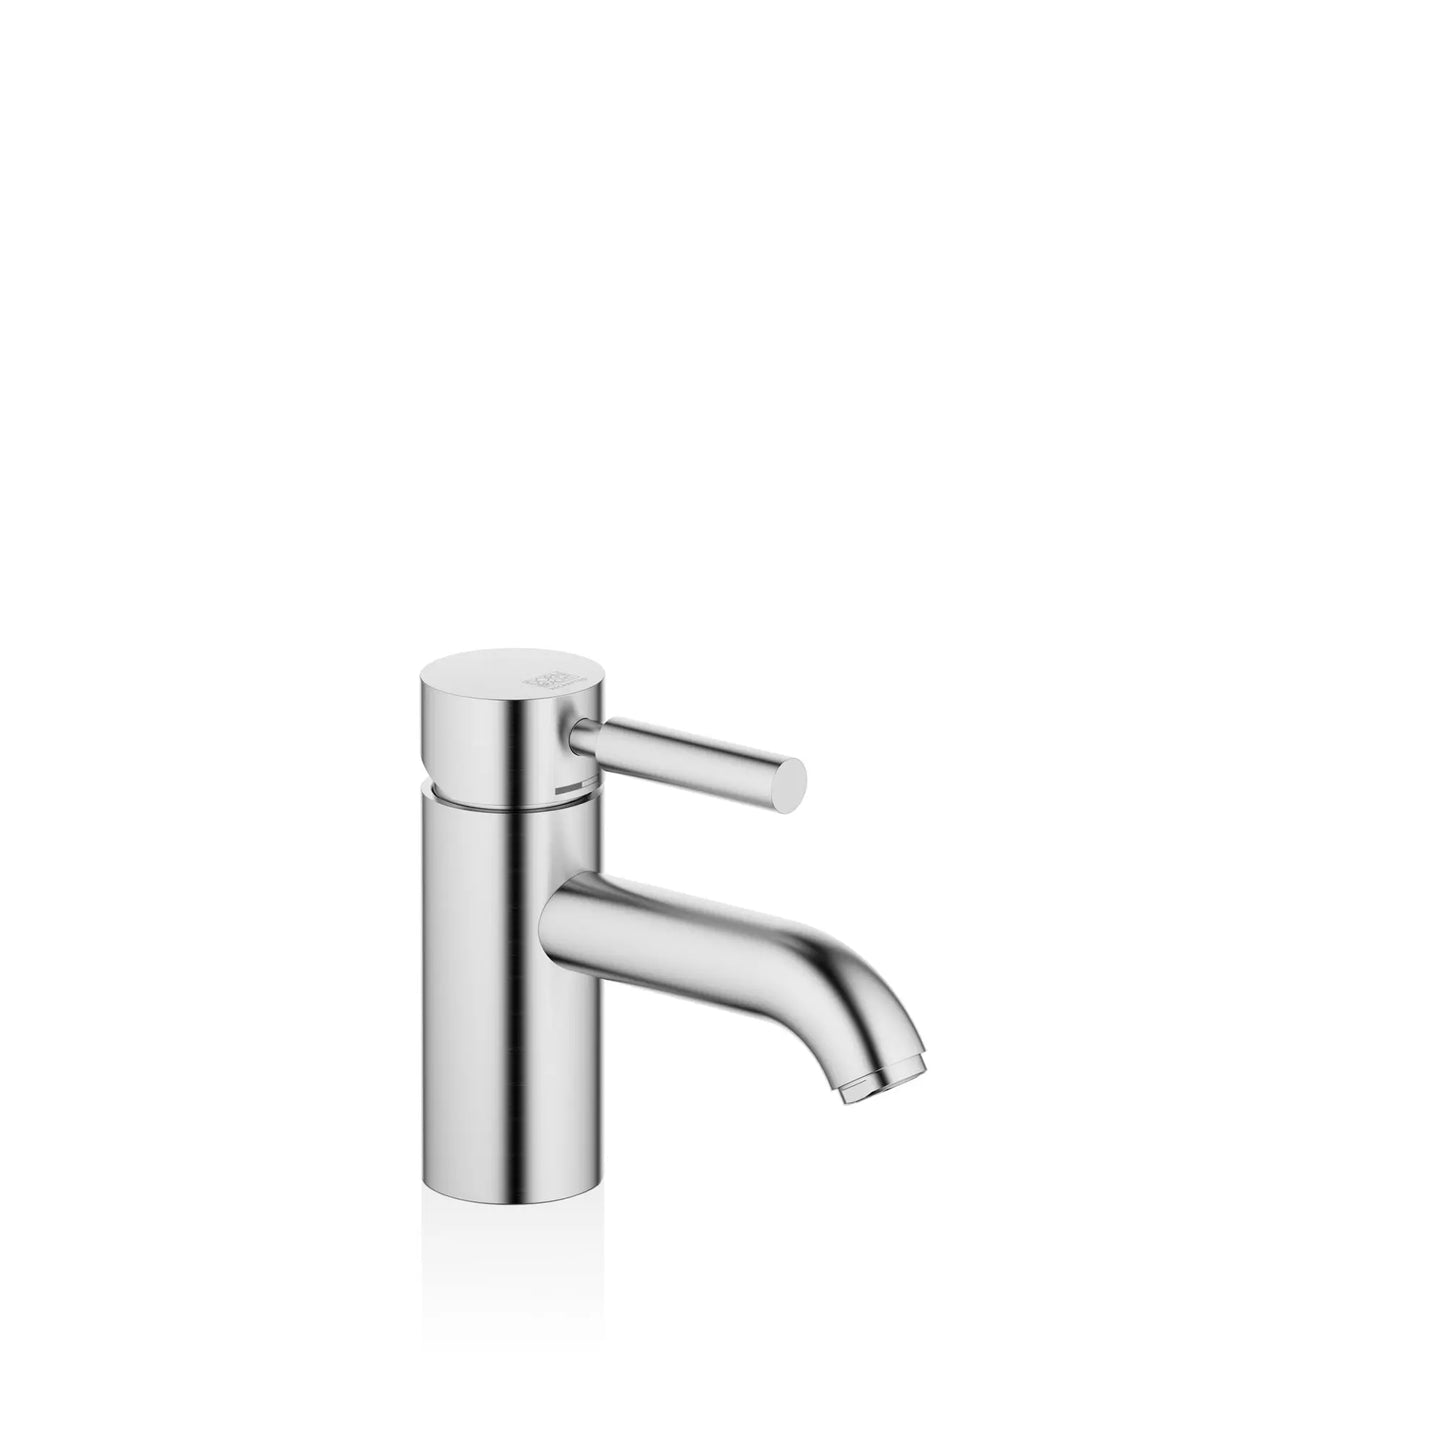 EDITION PRO GRANDE Single-lever basin mixer without pop-up waste